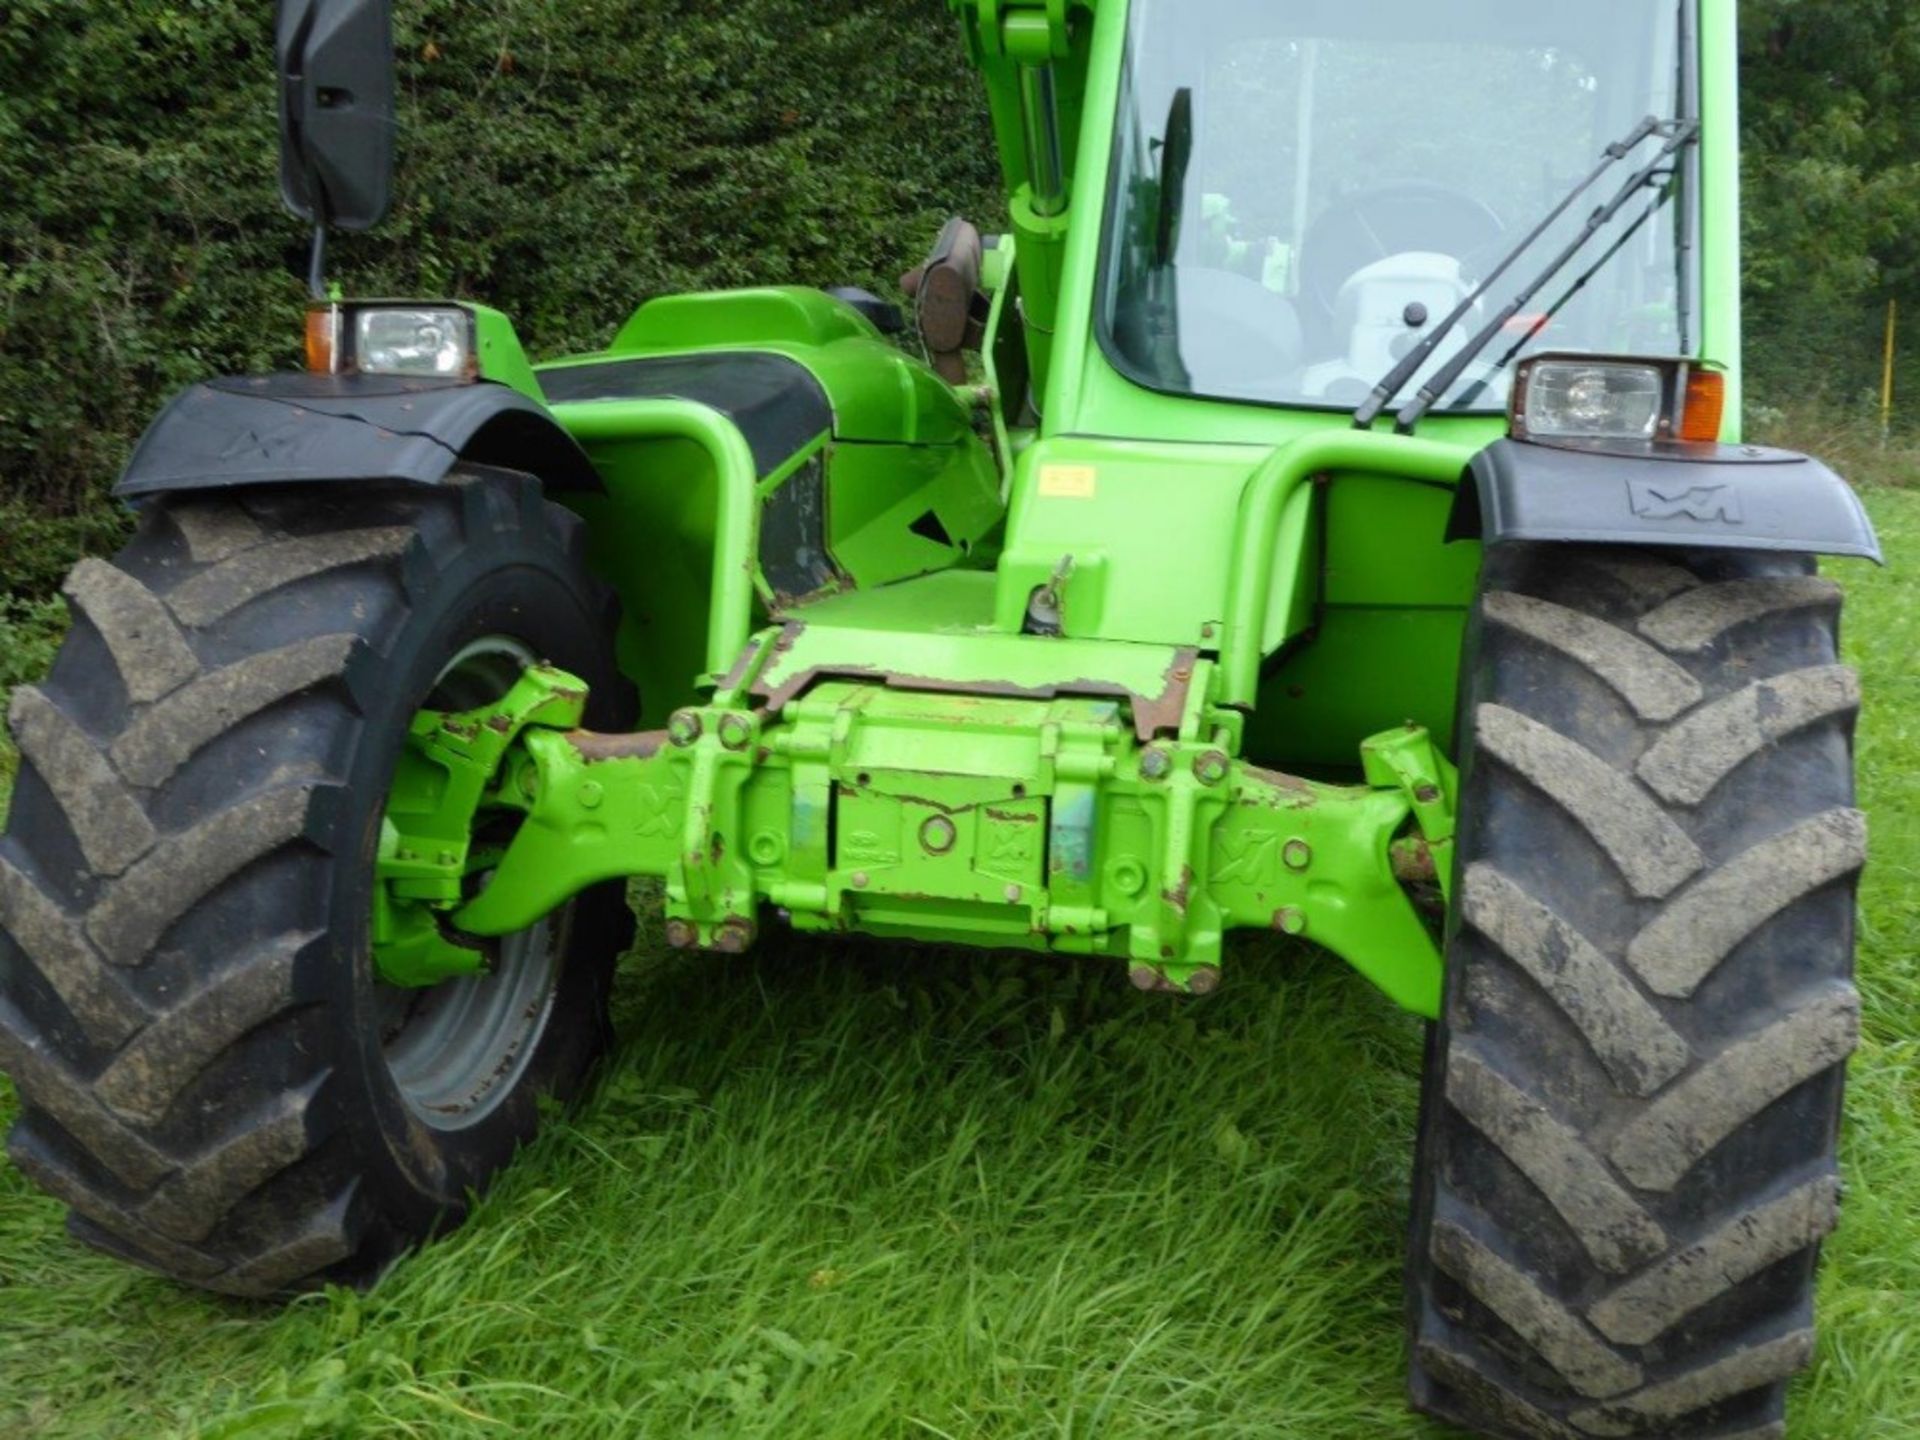 2010 Merlo Panoramic P32.6 Plus Telehandler. Pallet Forks & Pick Up Hitch. 7400 hrs - Image 4 of 11